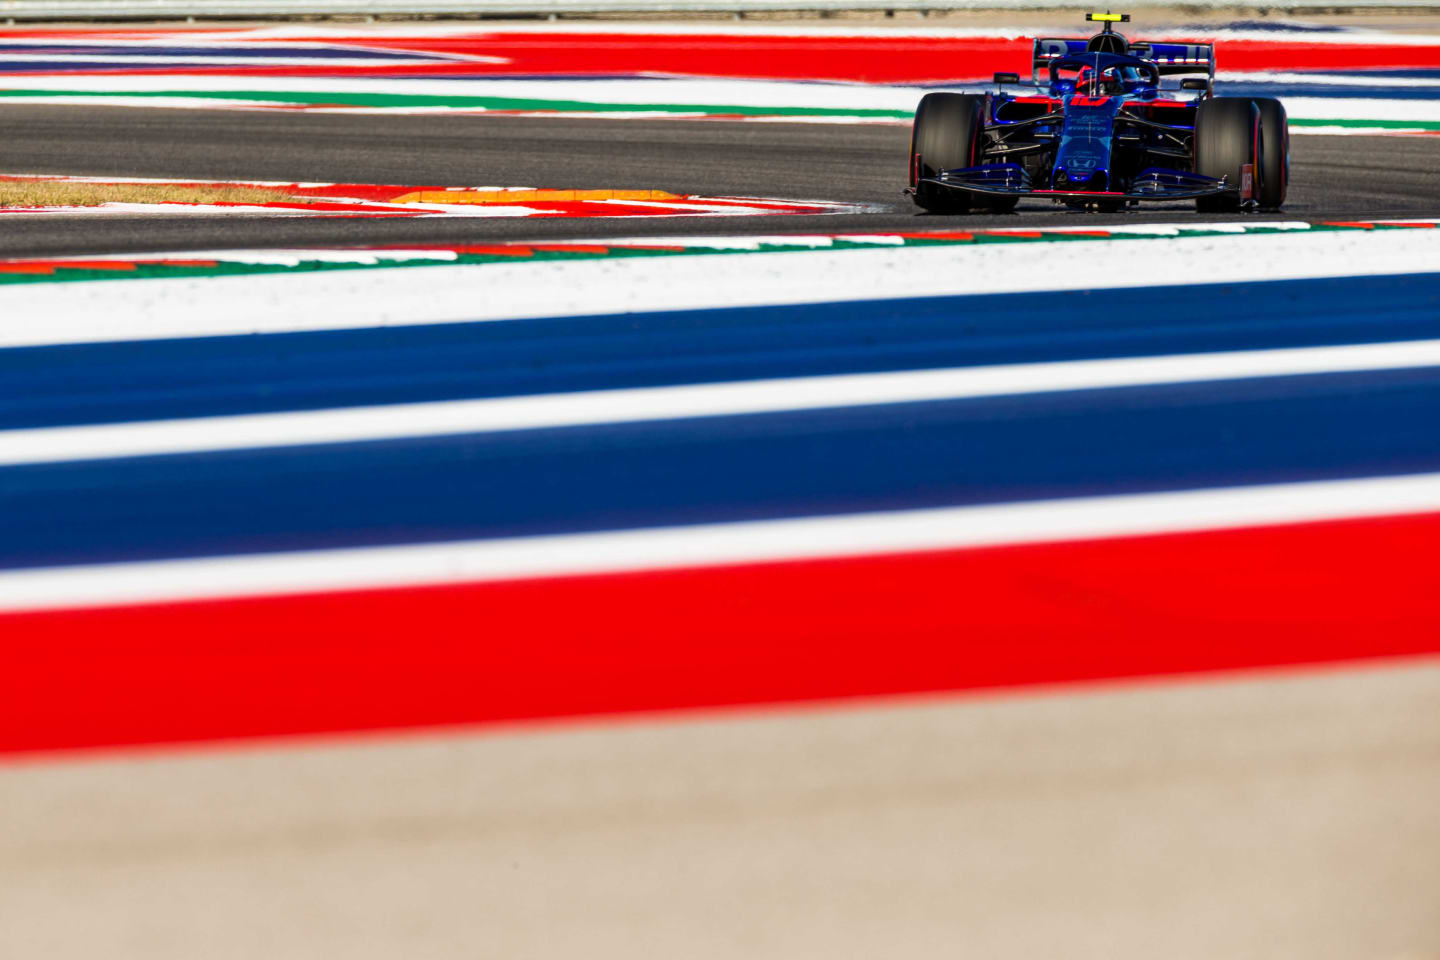 AUSTIN, TEXAS - NOVEMBER 02: Pierre Gasly of Scuderia Toro Rosso and France during qualifying for